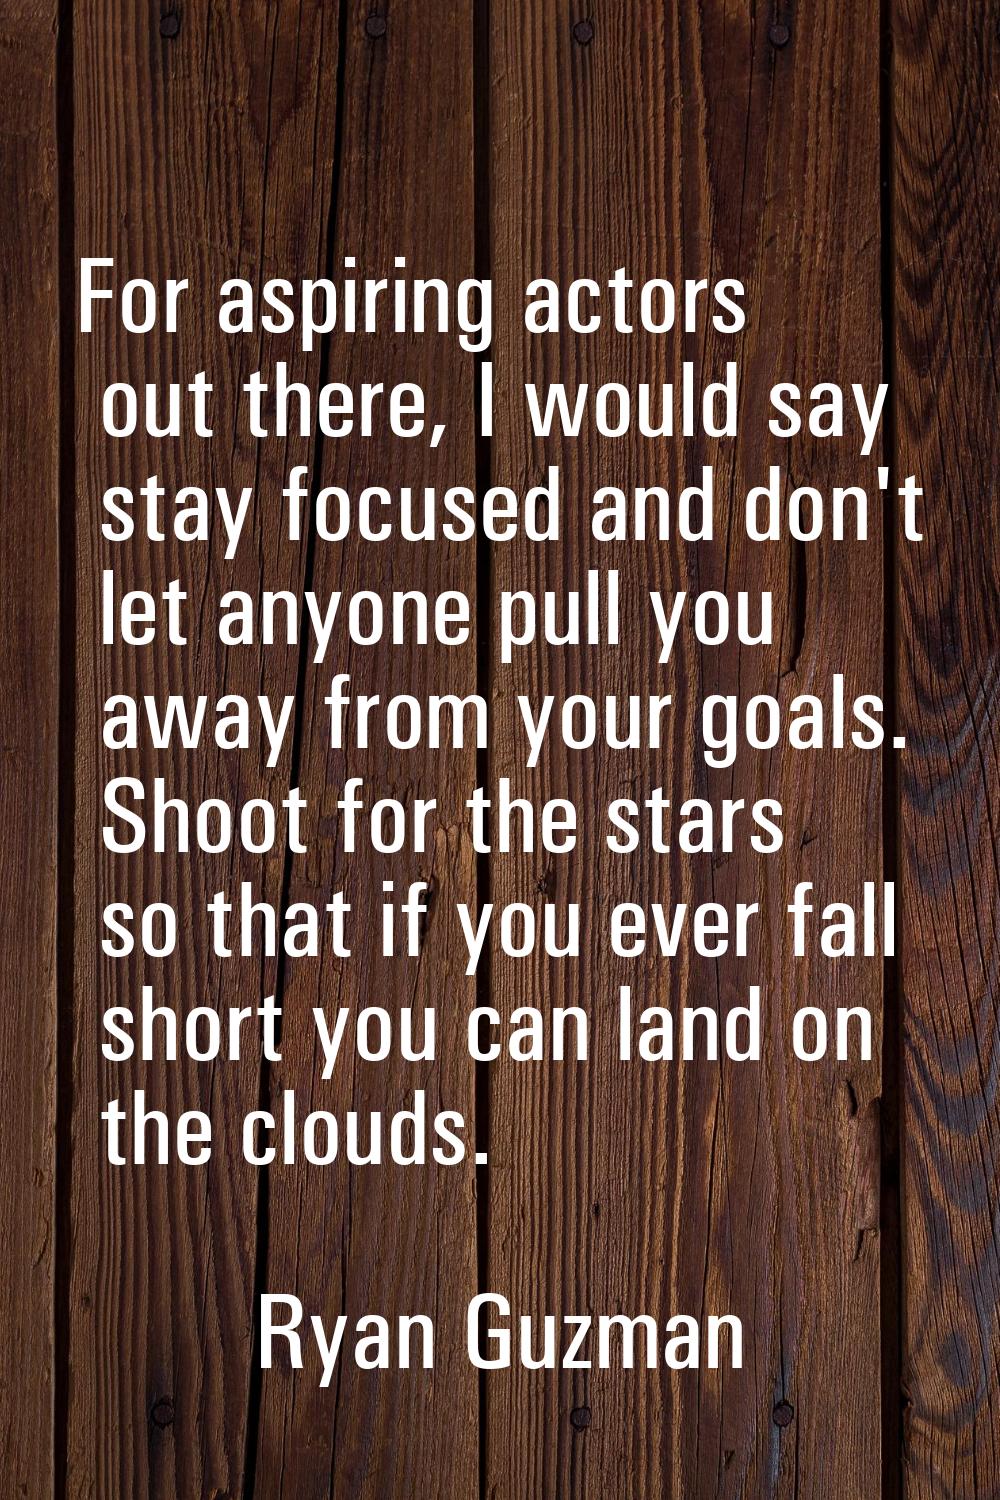 For aspiring actors out there, I would say stay focused and don't let anyone pull you away from you